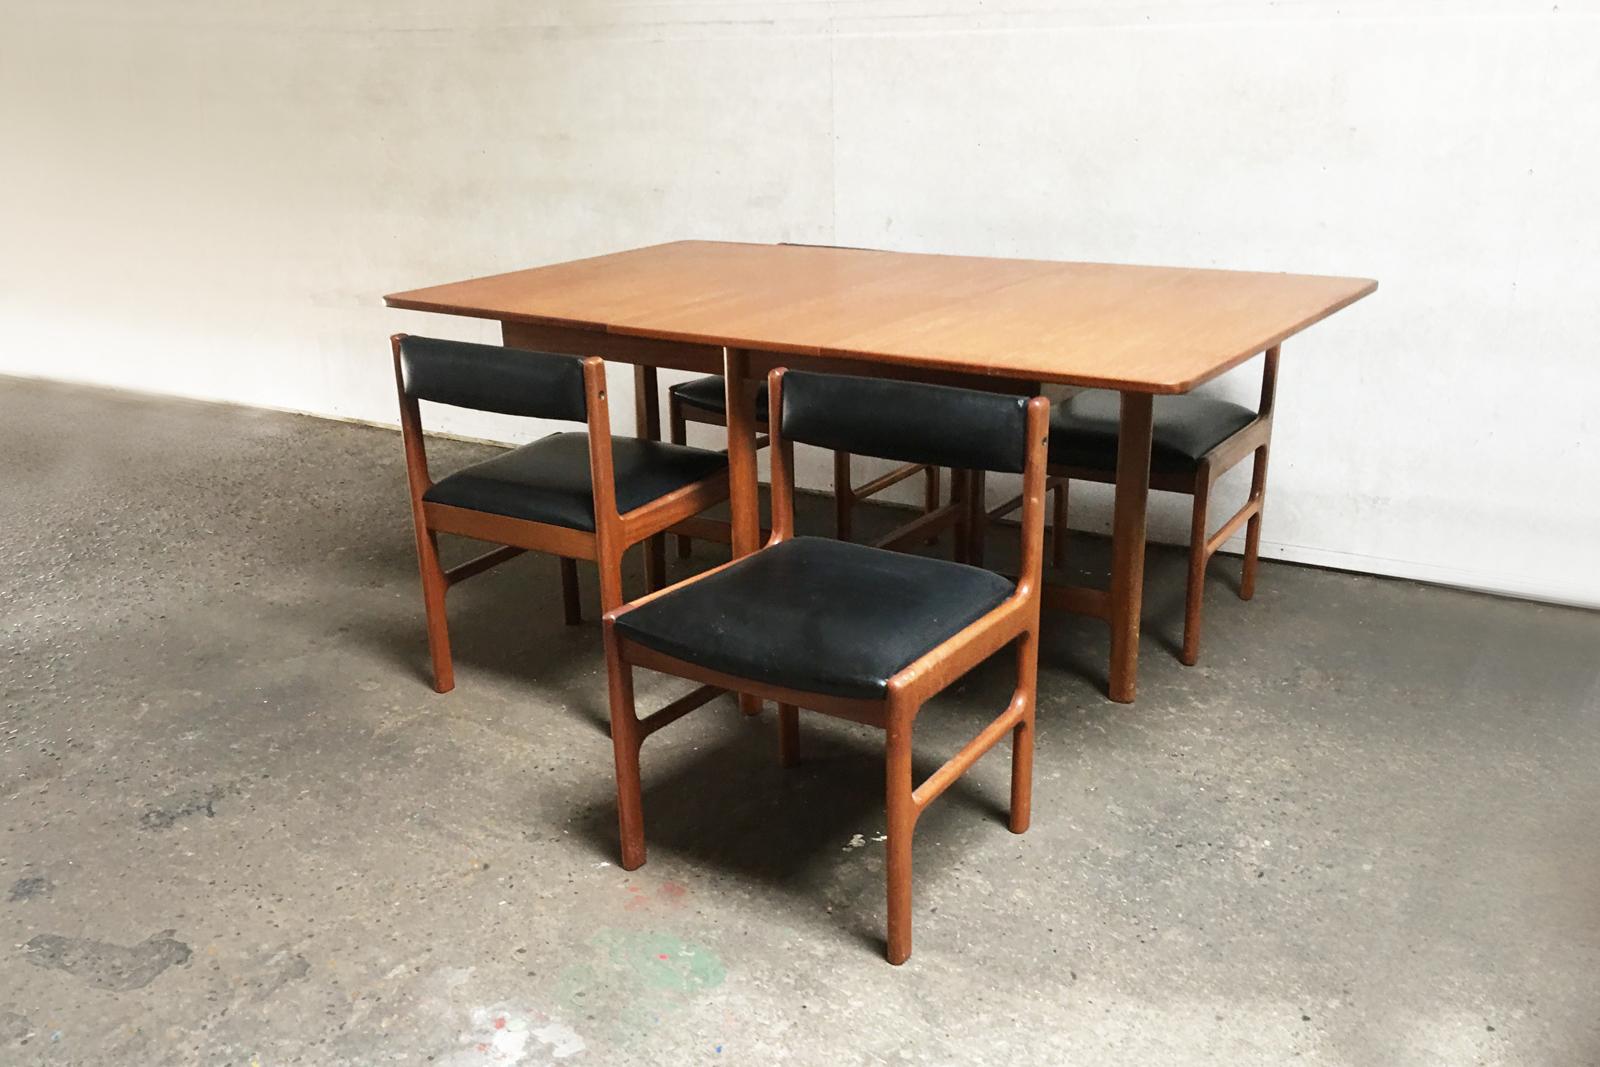 A very cool Danish influenced dining set by respected Scottish maker Mcintosh of Kirkcaldy. The chairs are well padded and upholstered in the original black vinyl and have a low distinctive low back. They can slot underneath the table when not in